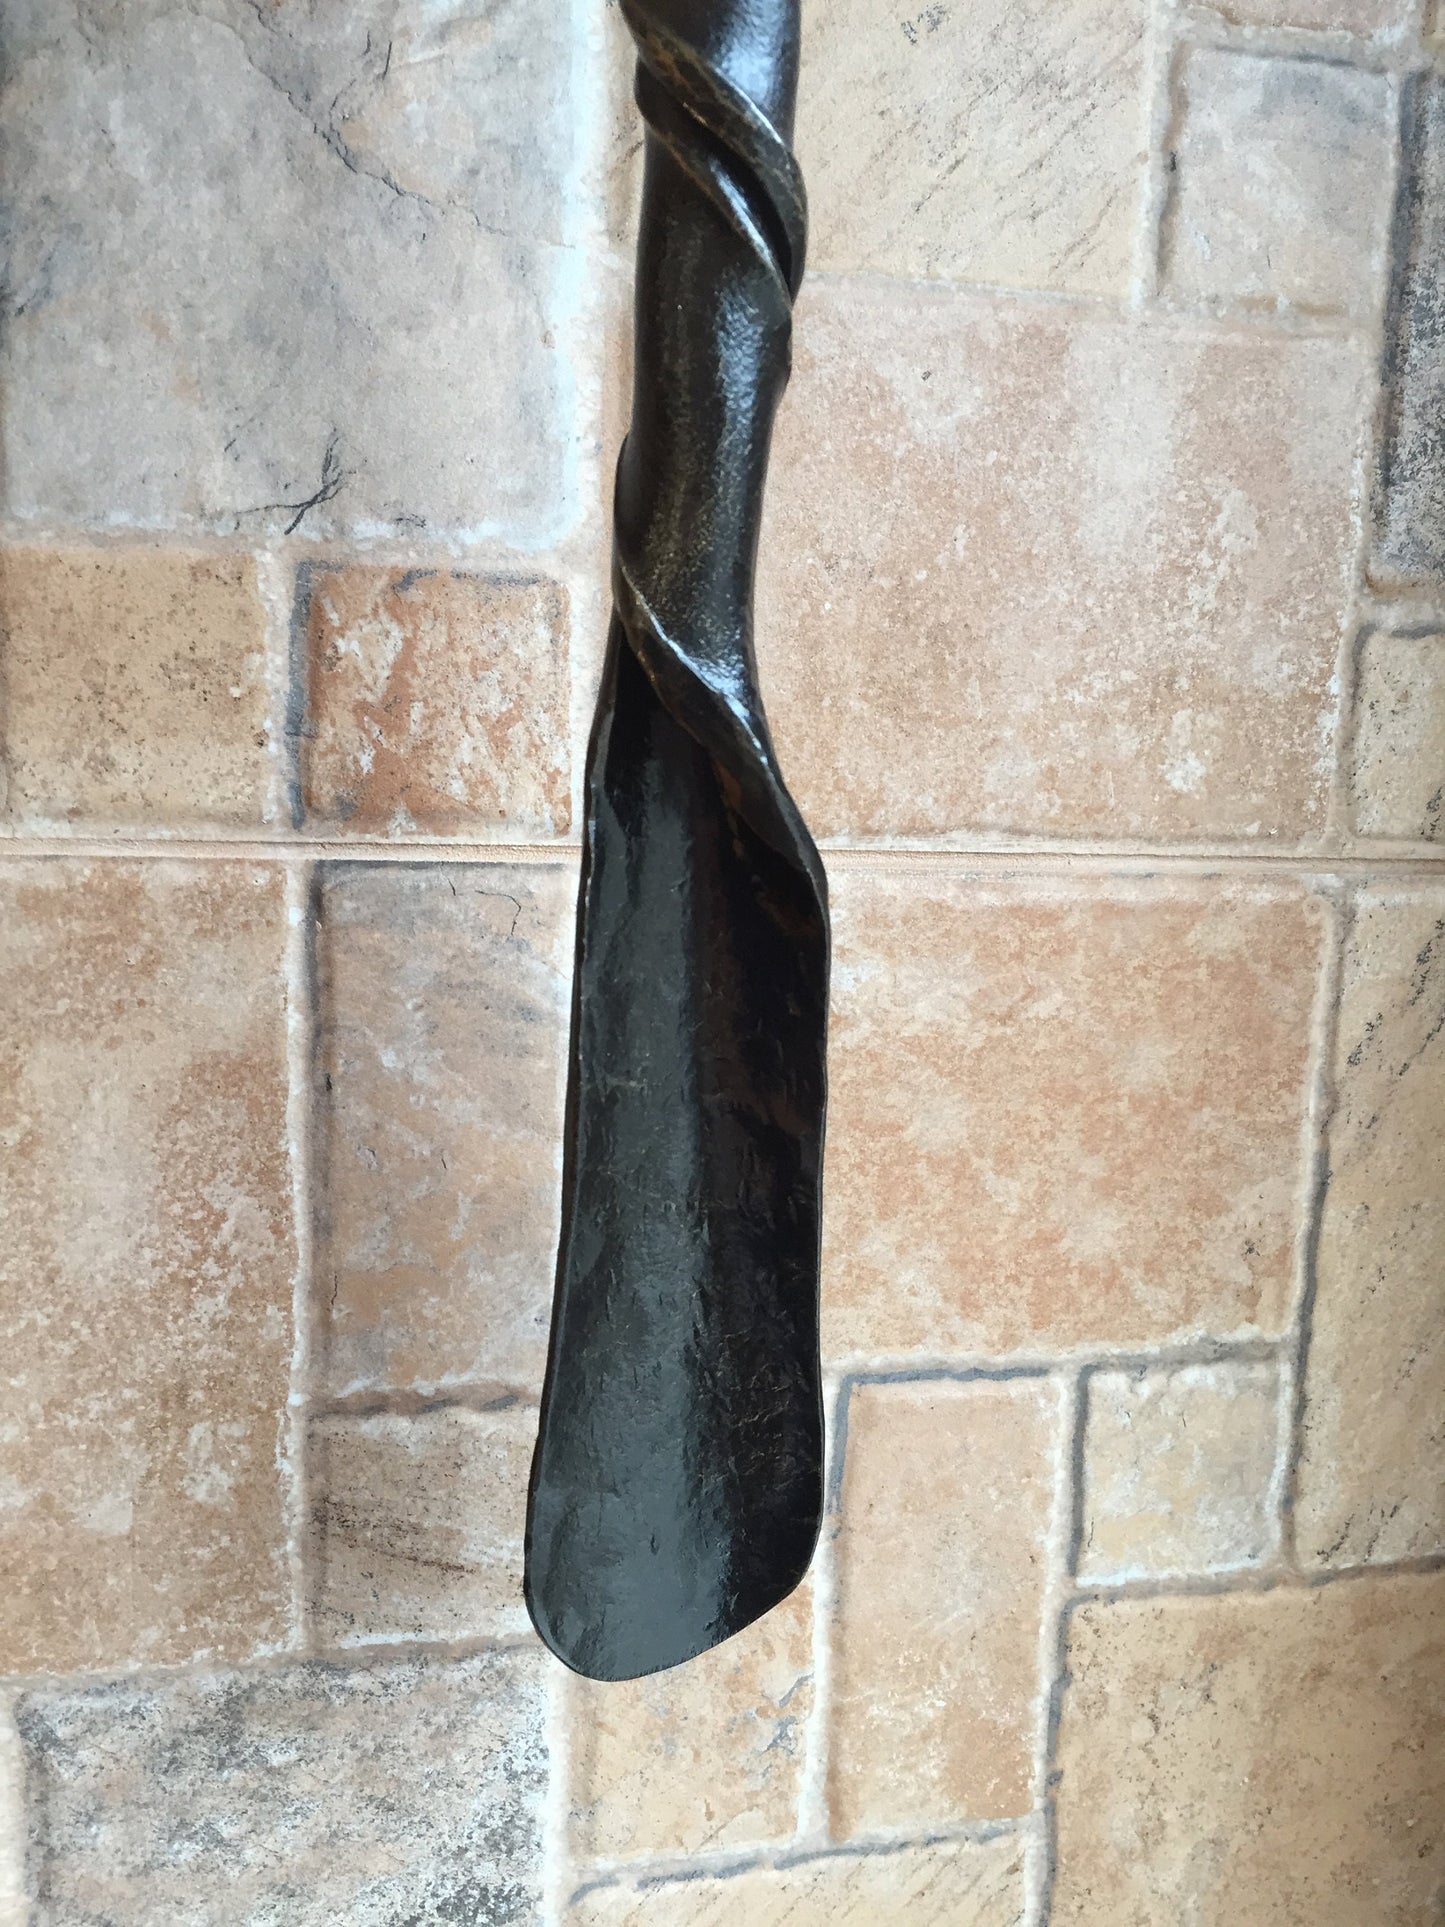 Iron shoehorn, metal shoe horn, hand forged shoe horn, shoe horn, shoes accessories, shoes stuff, insoles, shoes, forged art, metal artwork